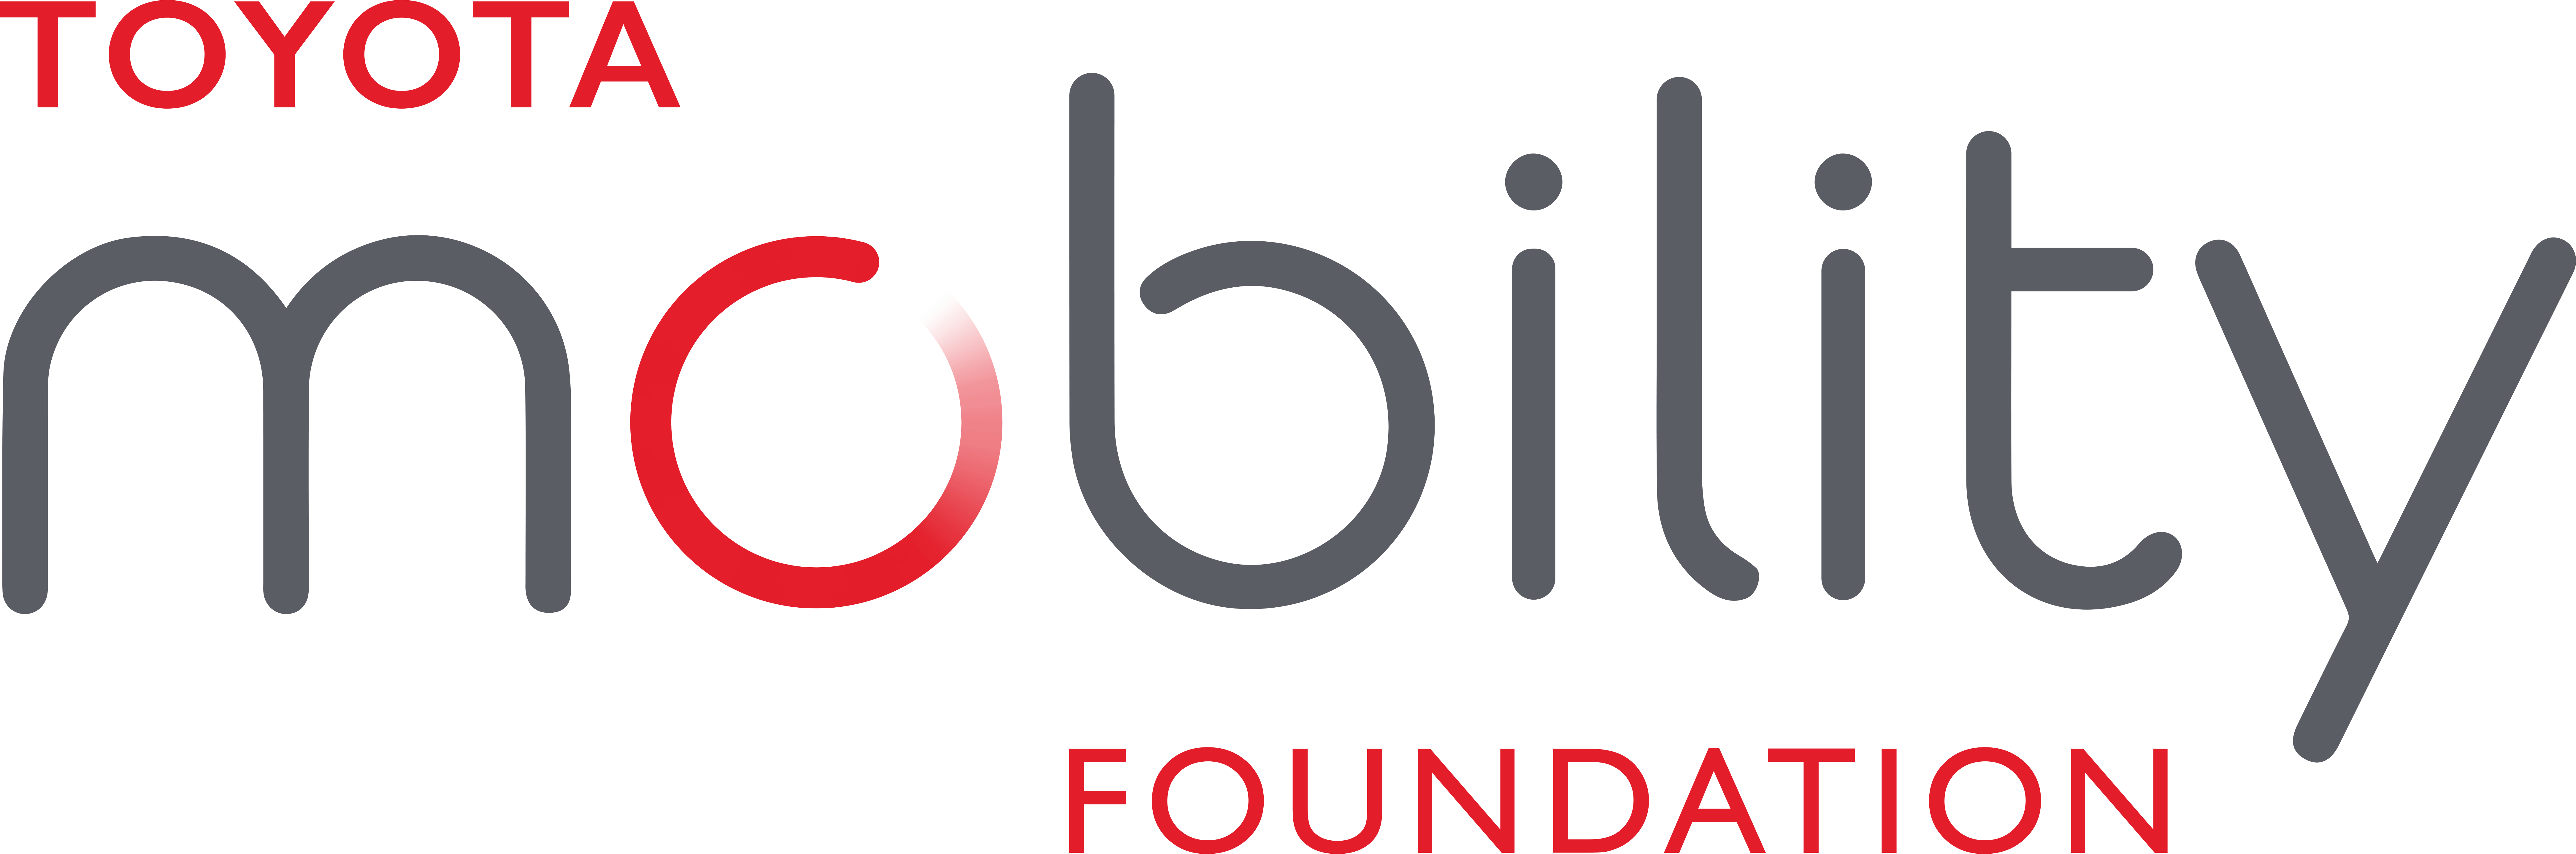 A M Mobility Logo - Toyota Mobility Foundation | The Alan Turing Institute